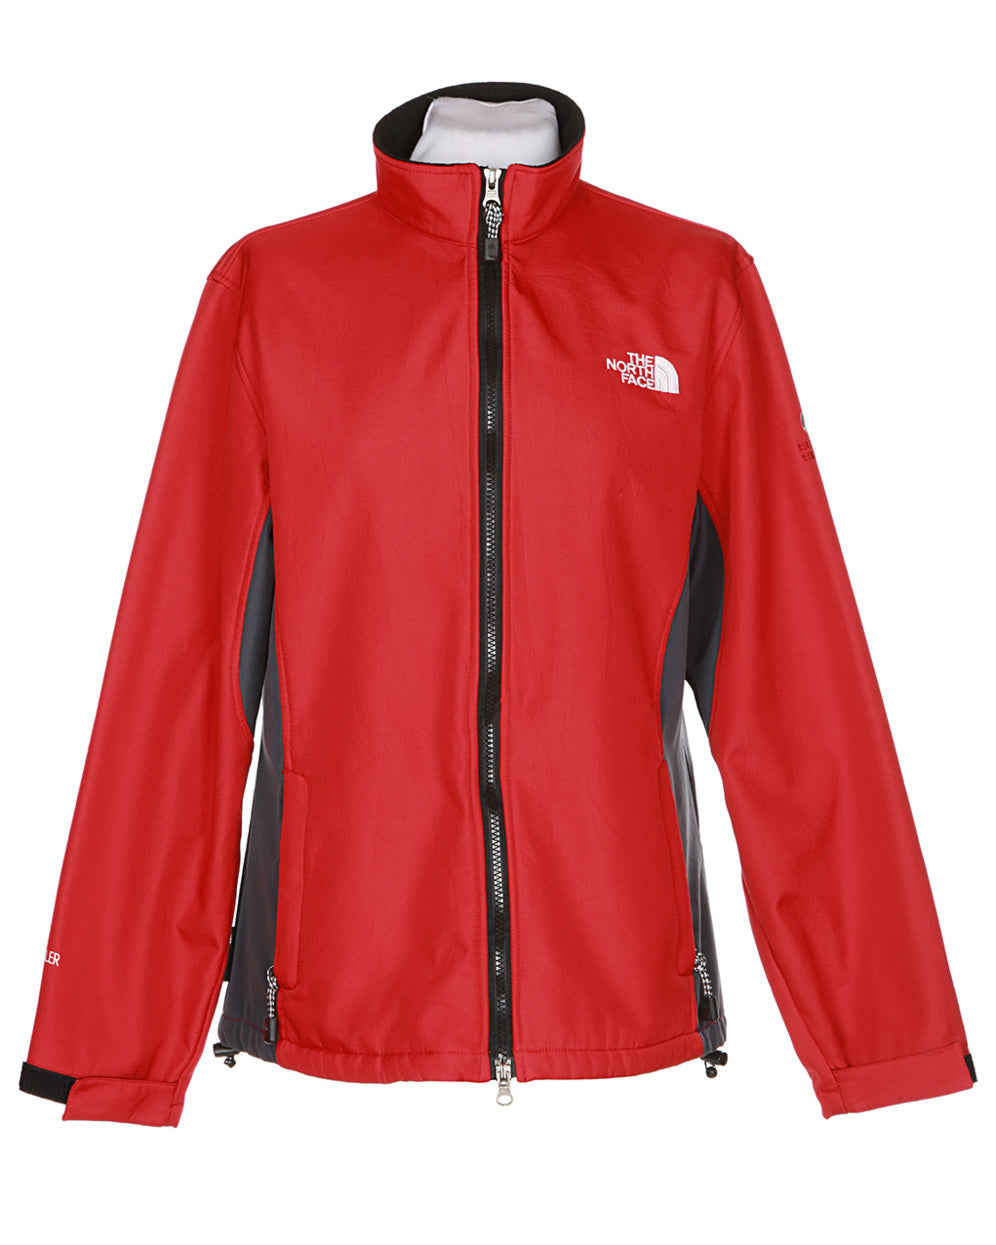 The North Face Red And Grey Jacket - M